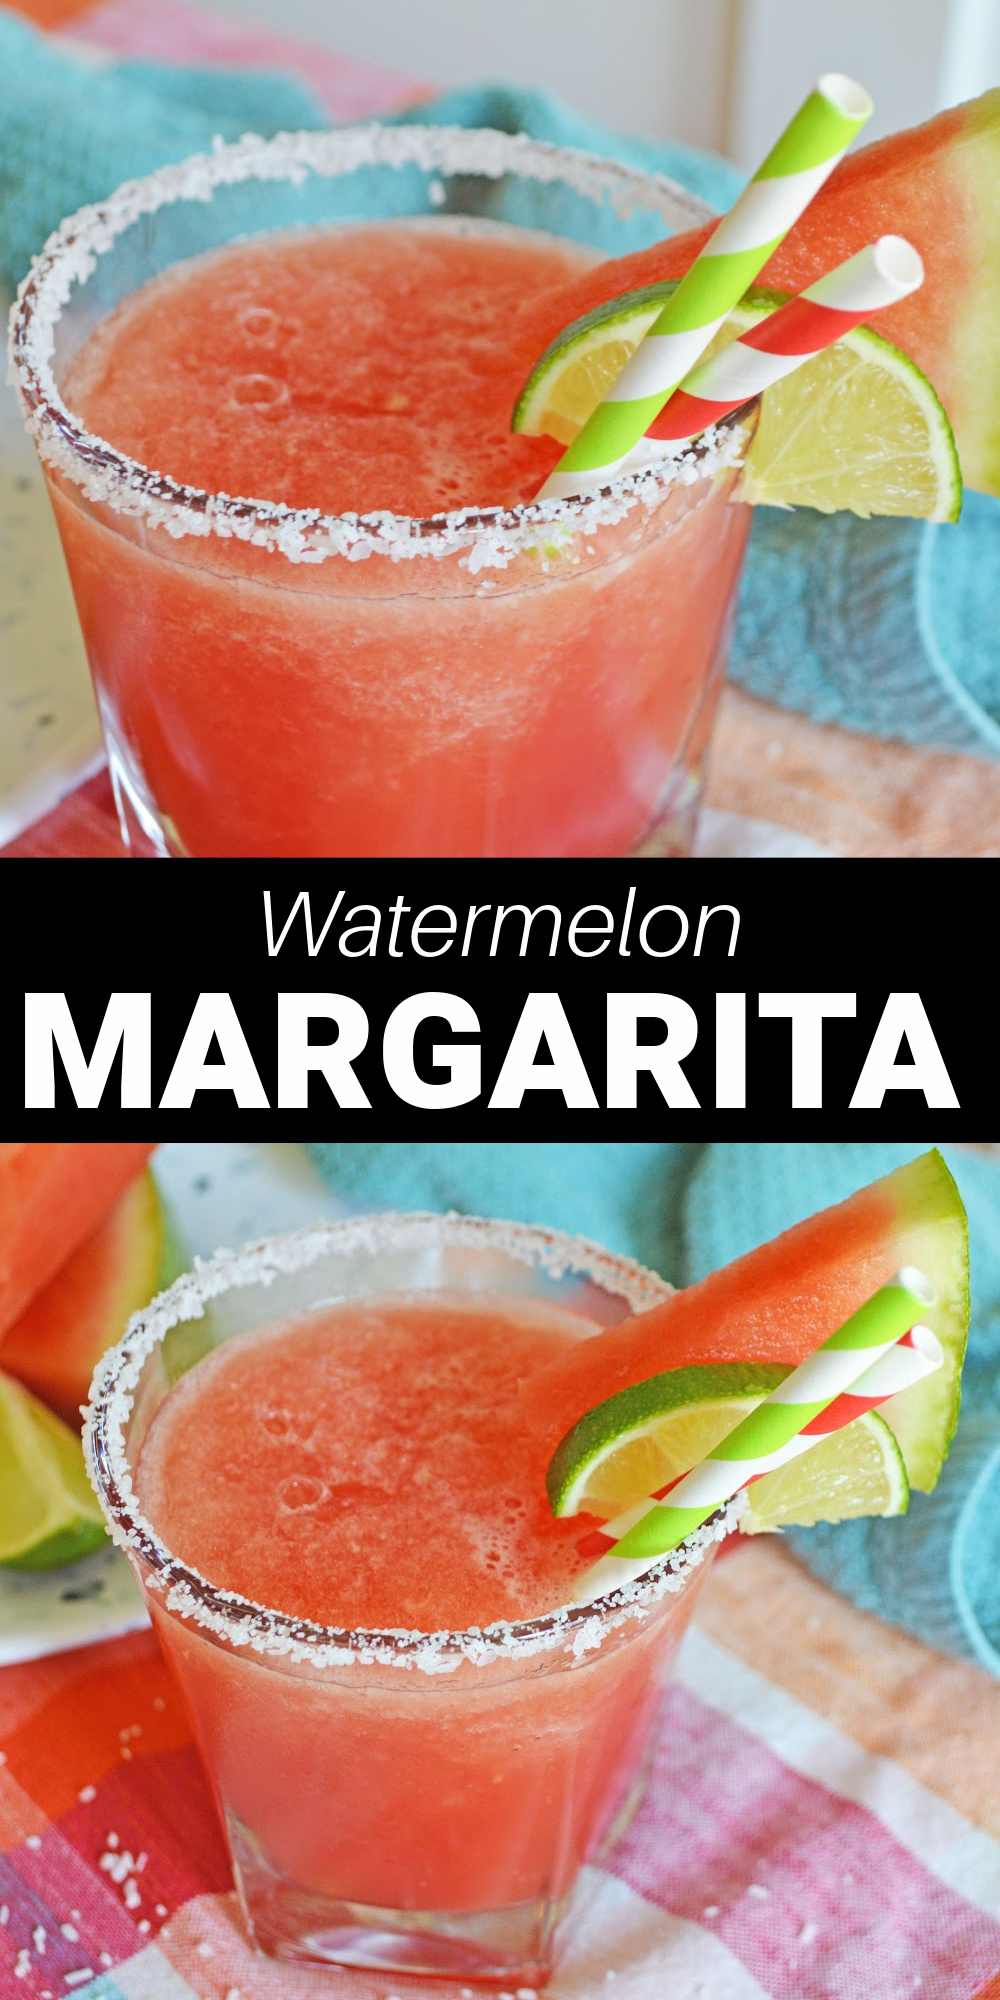 This watermelon margarita is the perfect summer cocktail! Made with simple ingredients and fresh watermelon, it's a light and refreshing take on the classic margarita recipe.